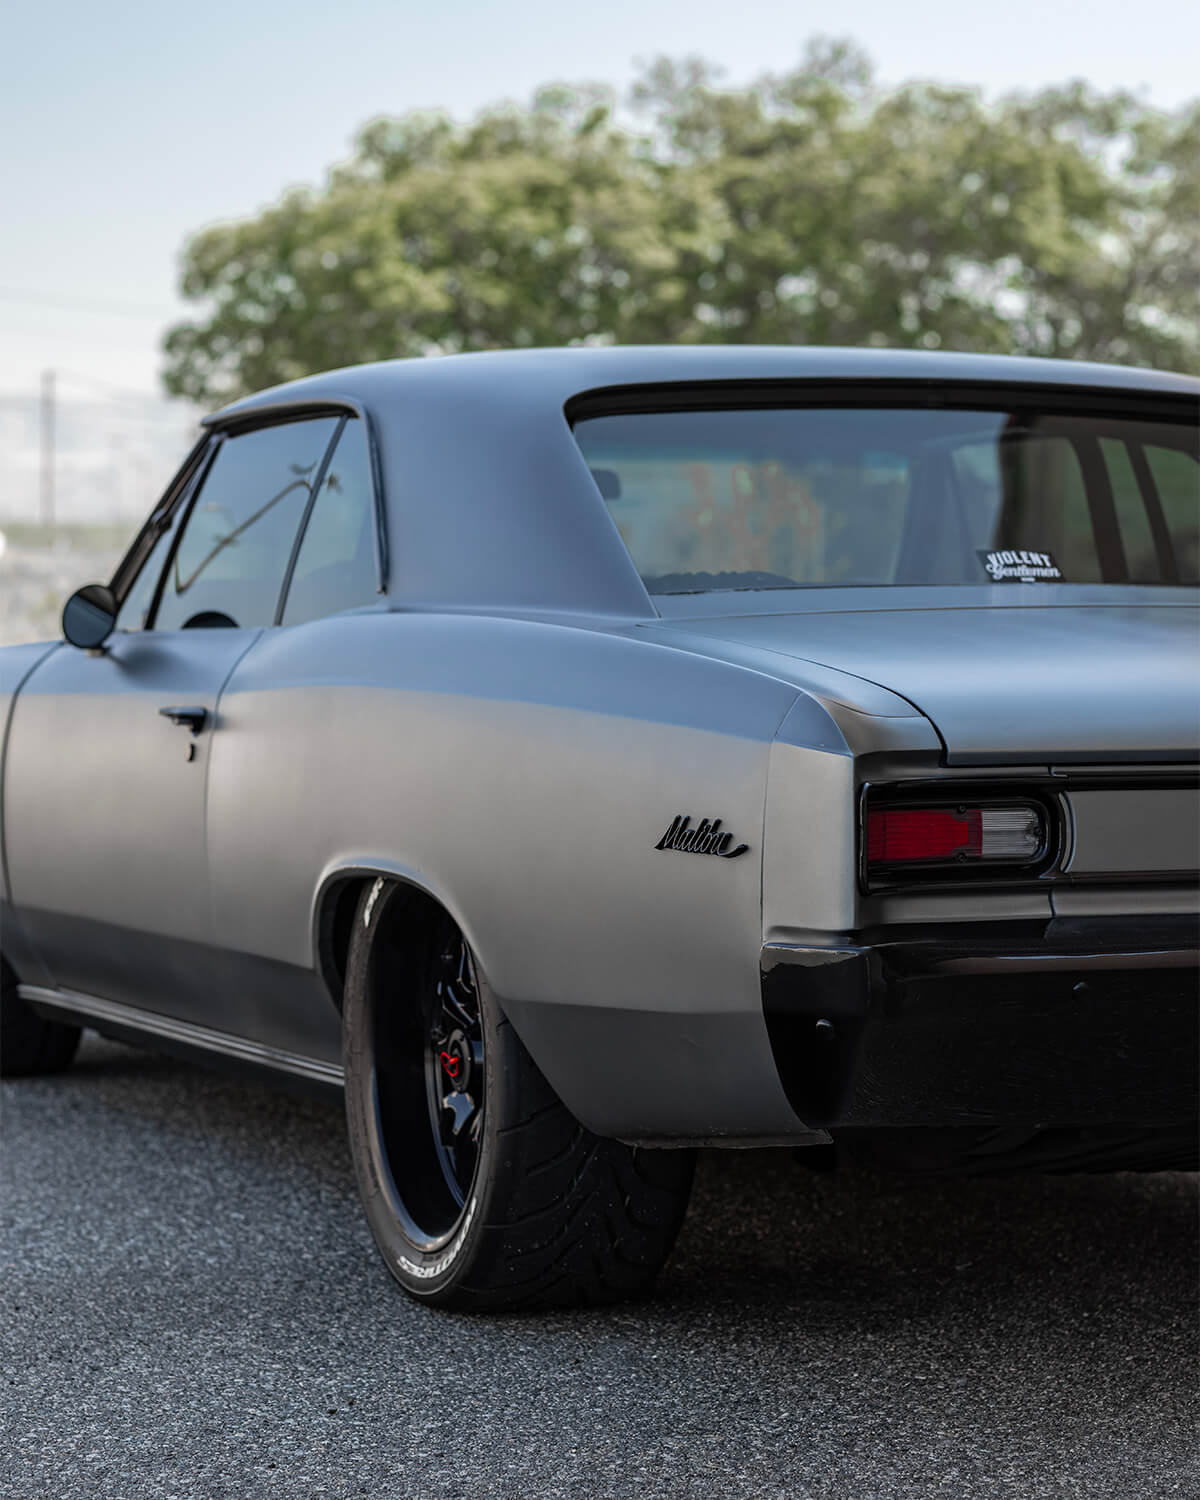 Pro Touring chevy malibu 1966 rear view, bumper and taillights